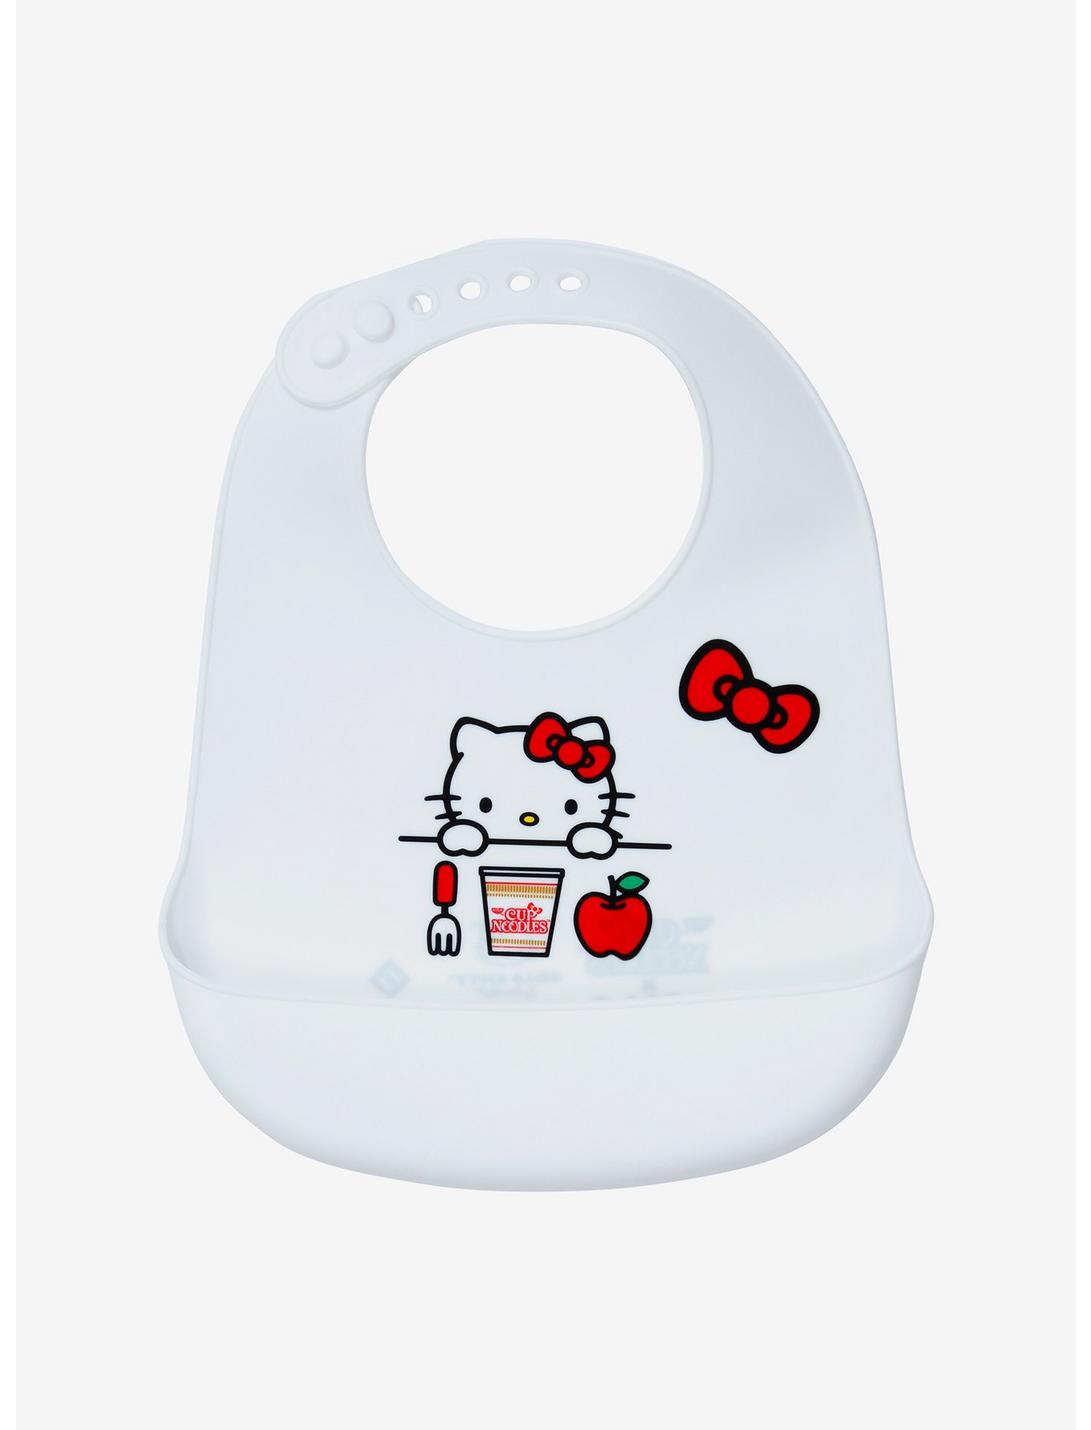 Nissin Cup Noodles x Hello Kitty Silicone Bib - BoxLunch Exclusive, , hi-res